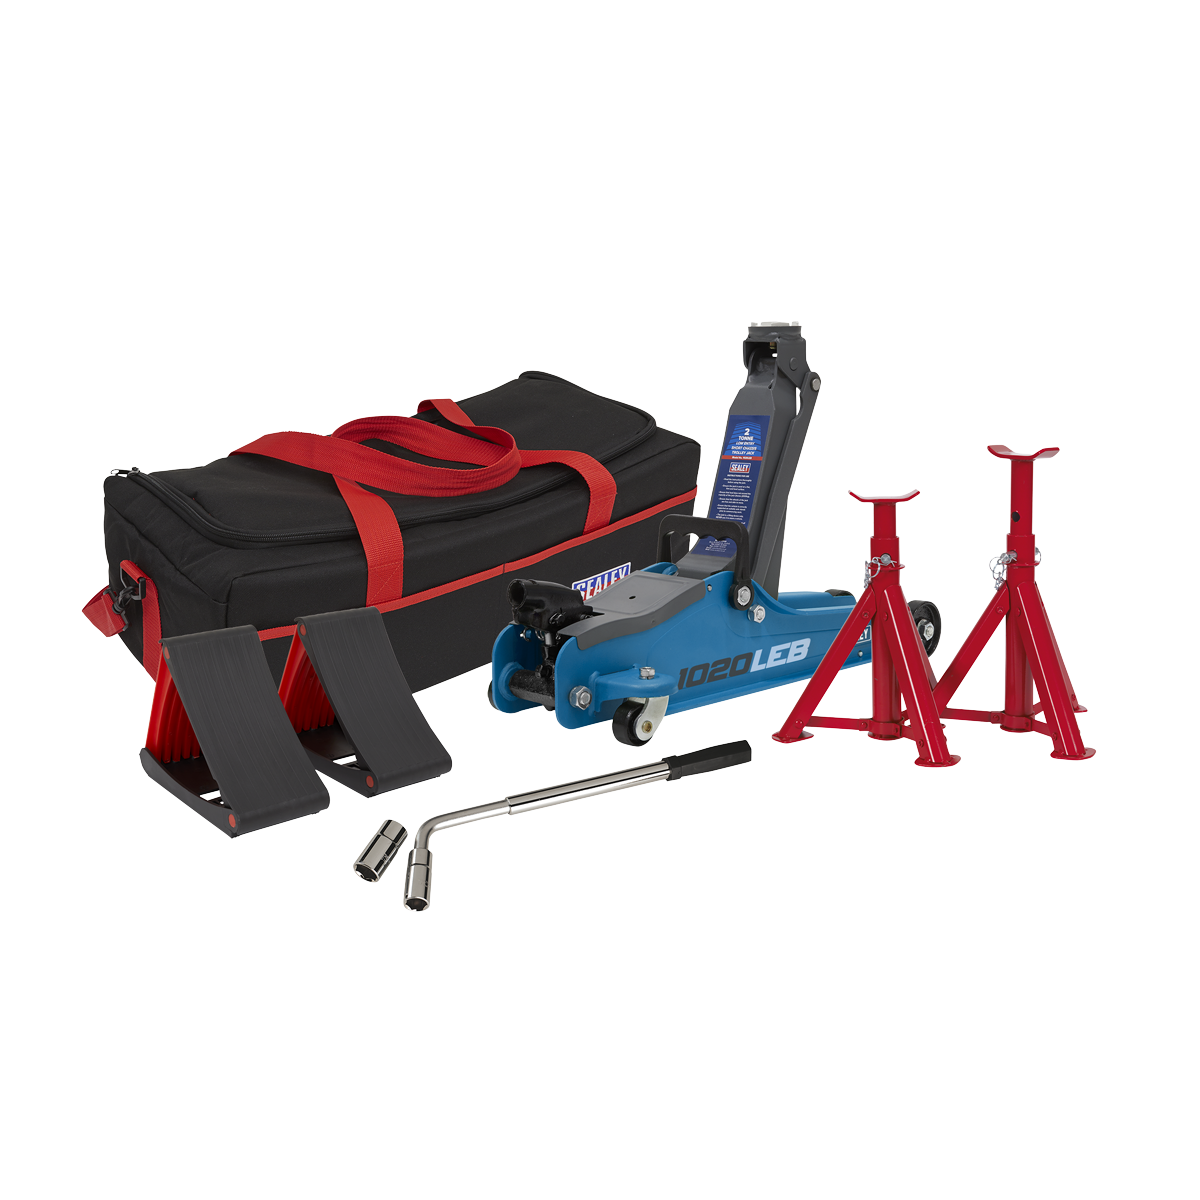 Sealey Trolley Jack 2 Tonne Low Entry Short Chassis & Accessories Bag Combo - Blue